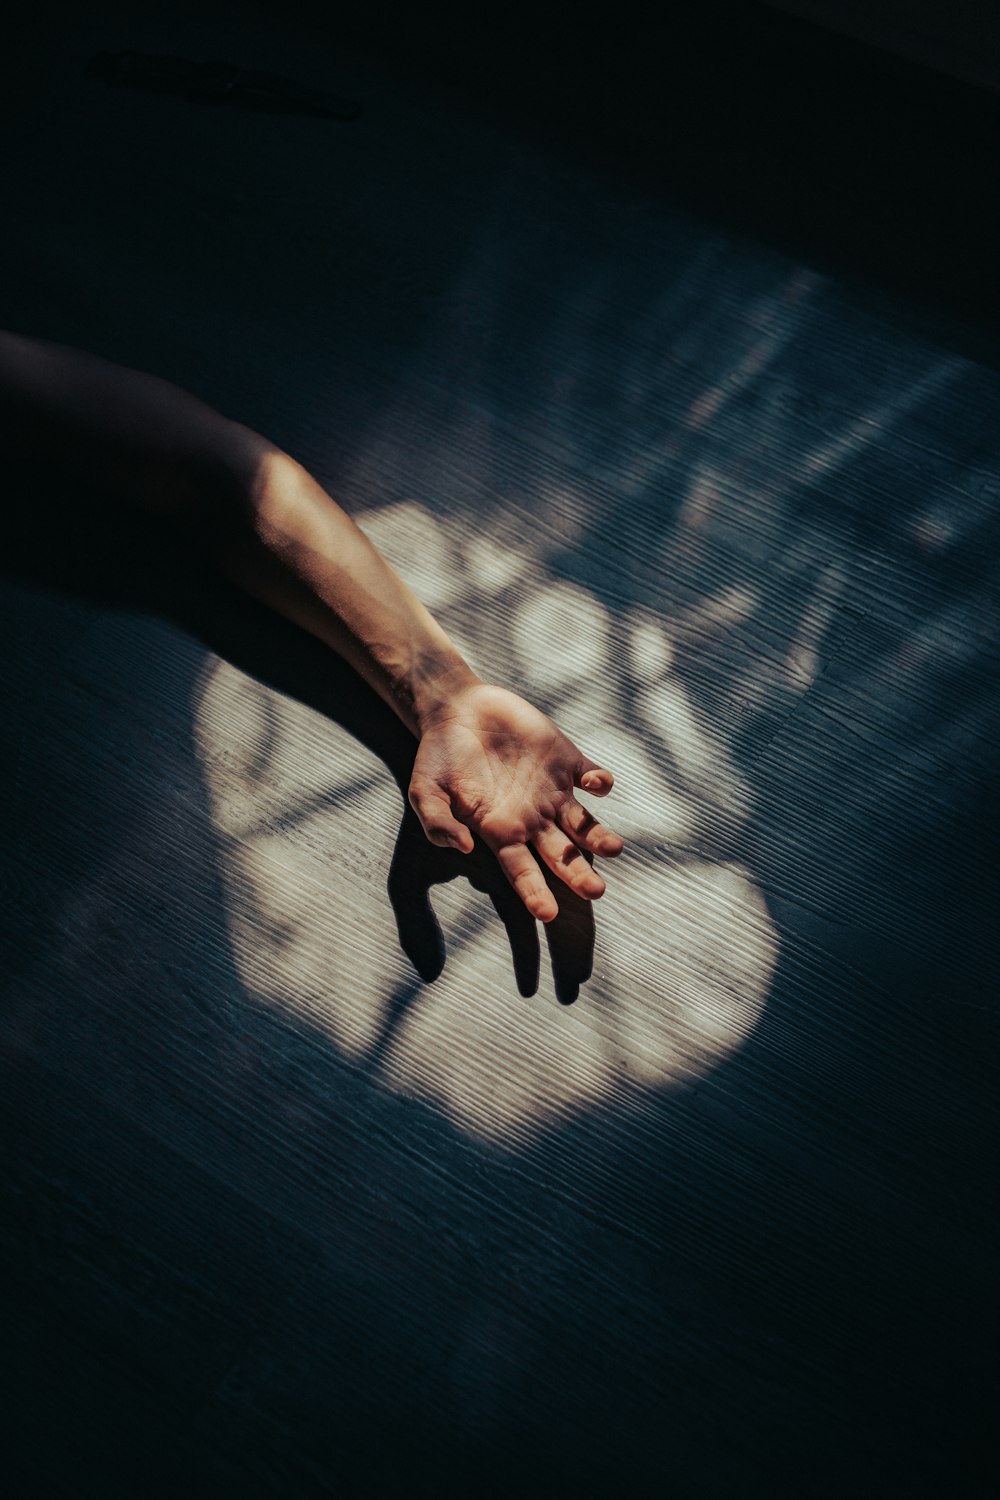 a person's hand reaching for something on the ground